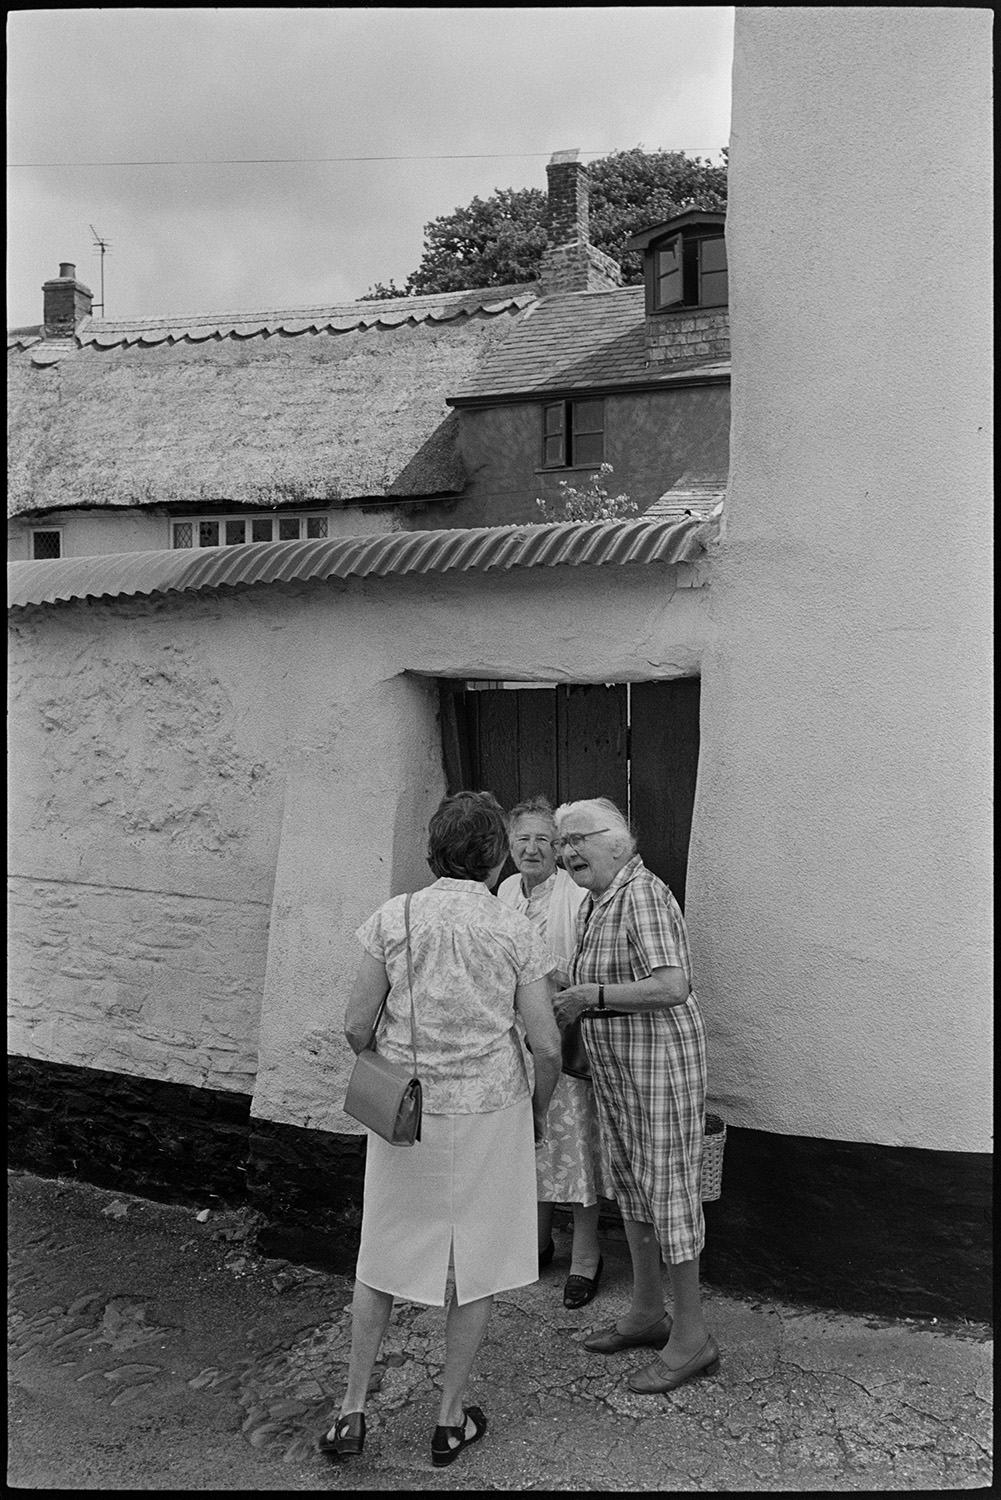 Fair, auction of sheep, farmers and crowds of spectators.
[Three women talking in a street in Chulmleigh on the day of Chulmleigh Fair. A thatched building can be seen in the background.]